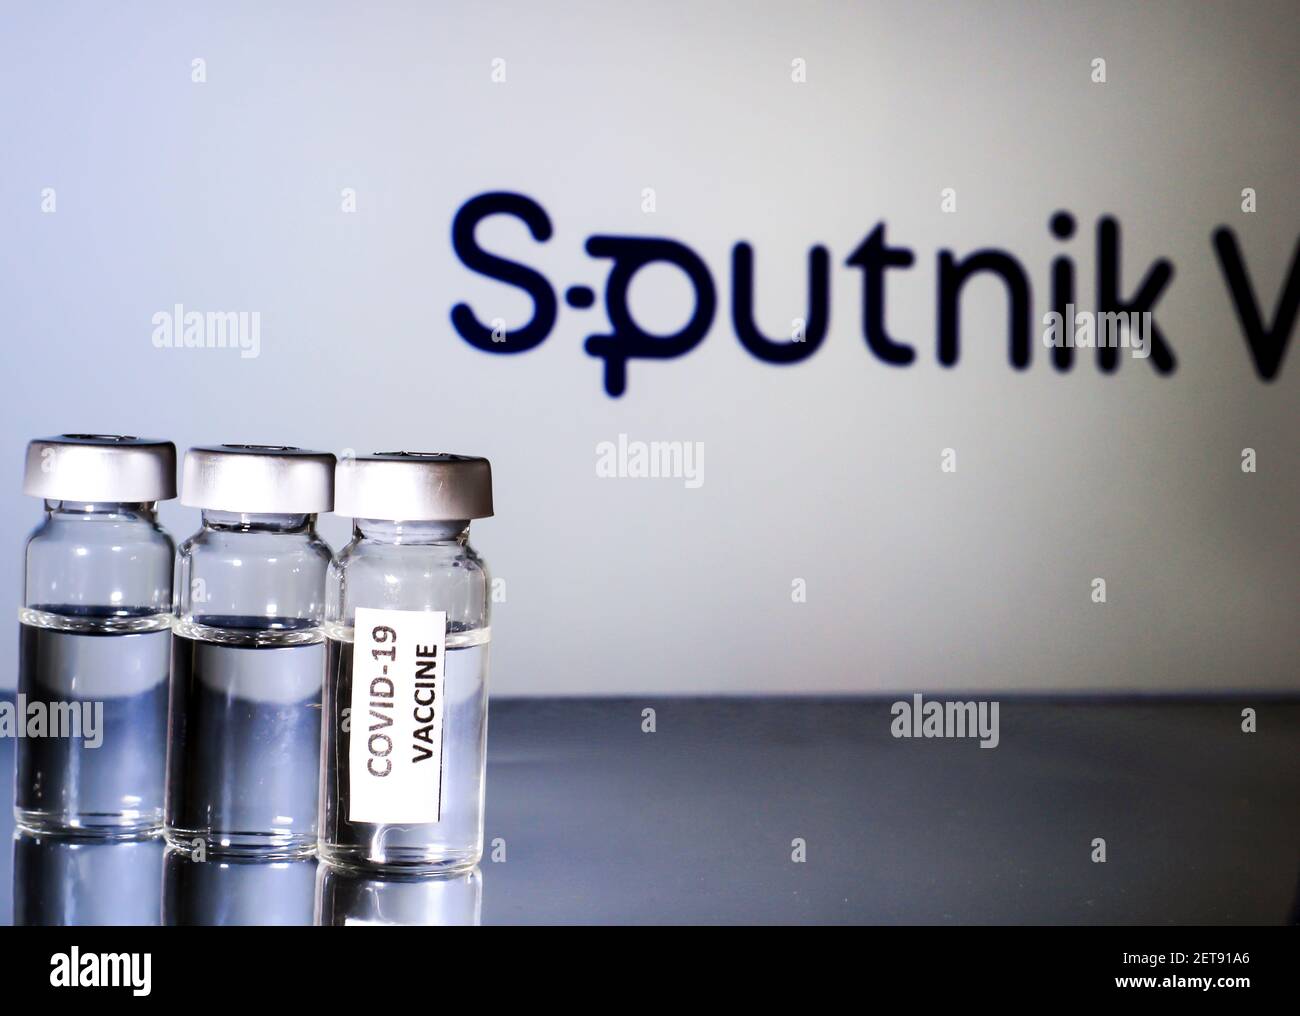 Madrid, Spain- February 23, 2021: Glass vials with covid-19 vaccine on white background. Sputnik V logo in the background. Stock Photo